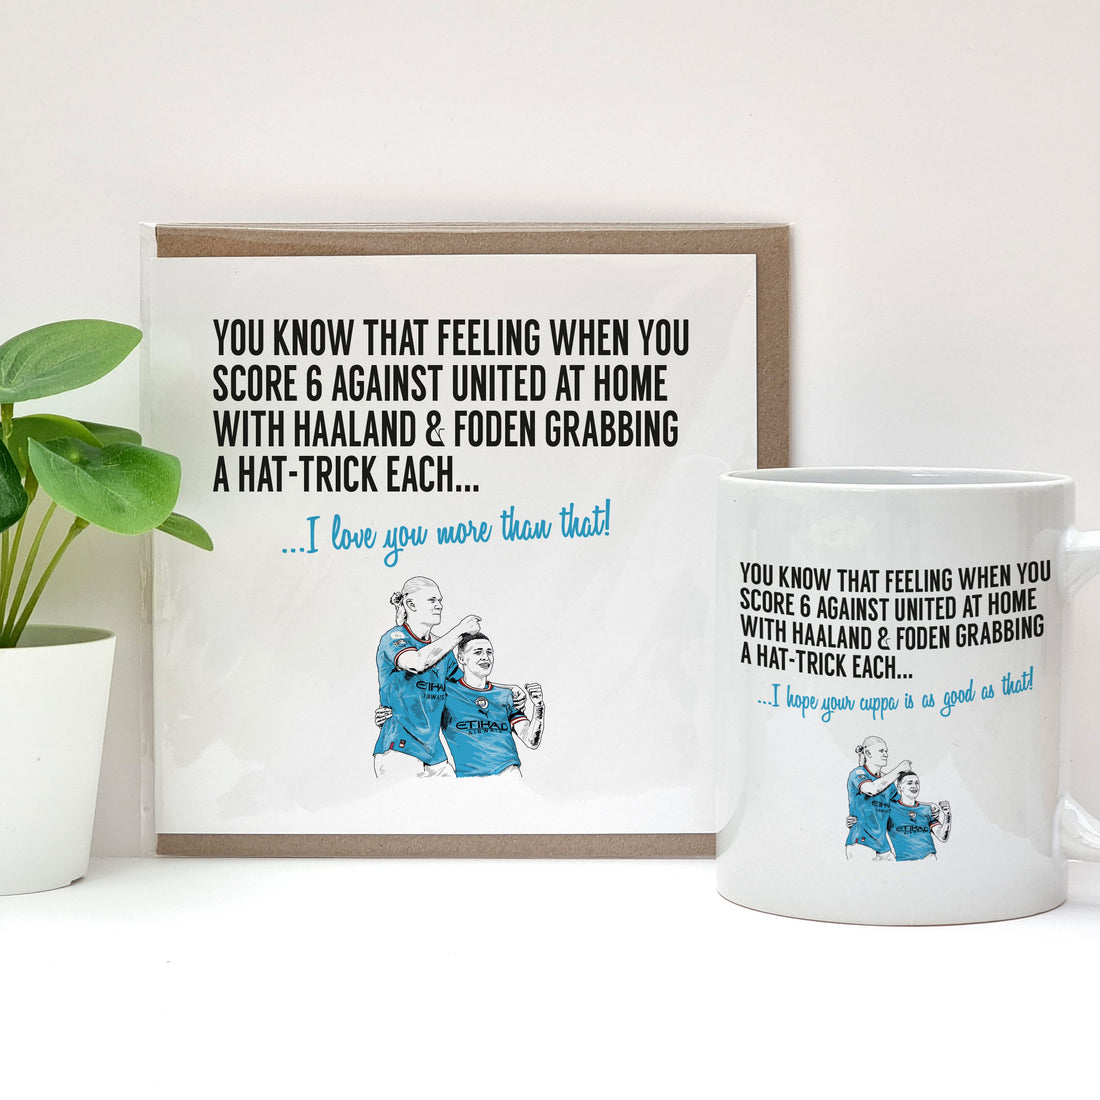 Manchester city fan card and mug gift set celebrating the win  against Man Utd with Haaland and Foden scoring hat-tricks. DESIGNED BY LOCAL LINGO